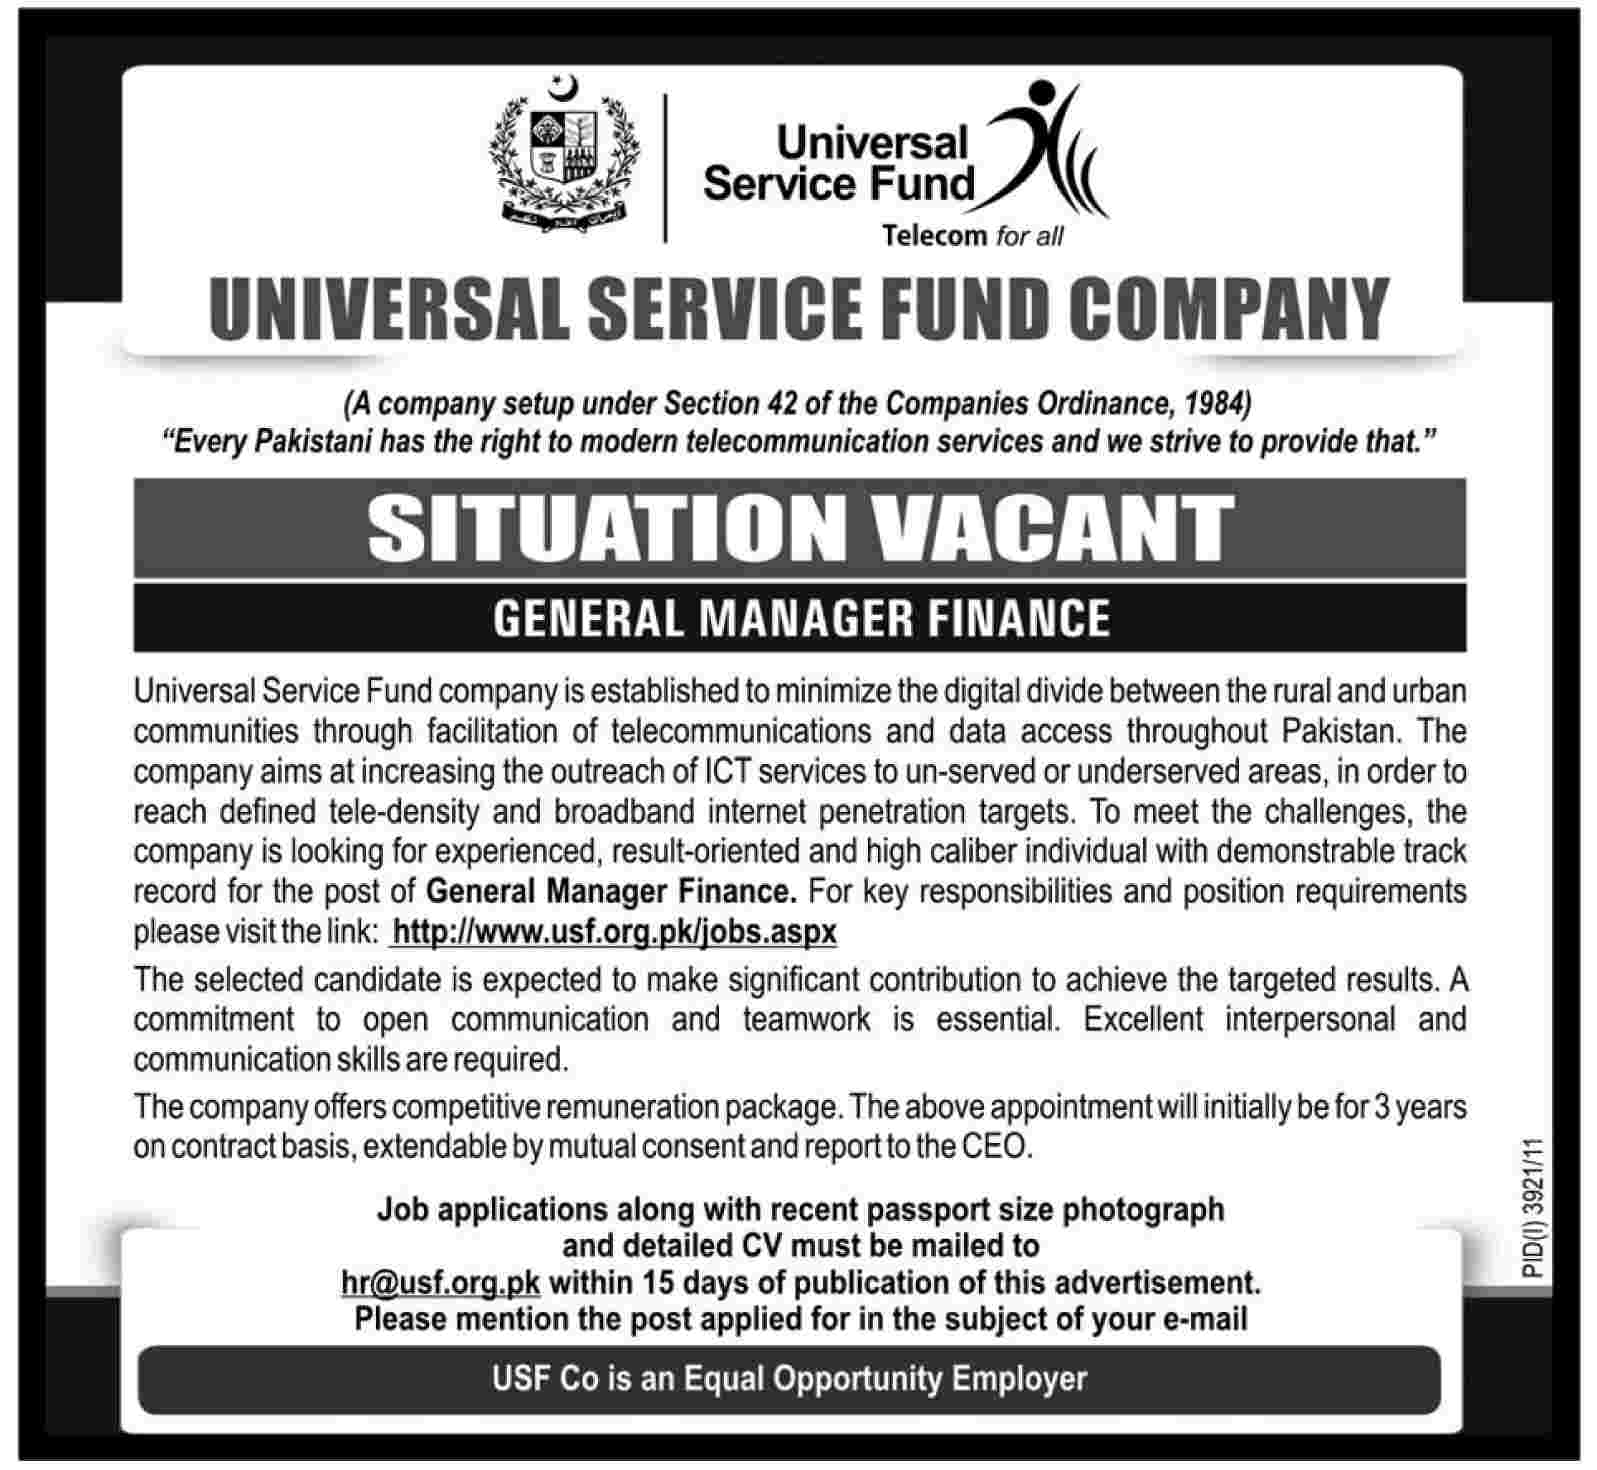 Universal Service Fund Company Required the Services of General Manager Finance